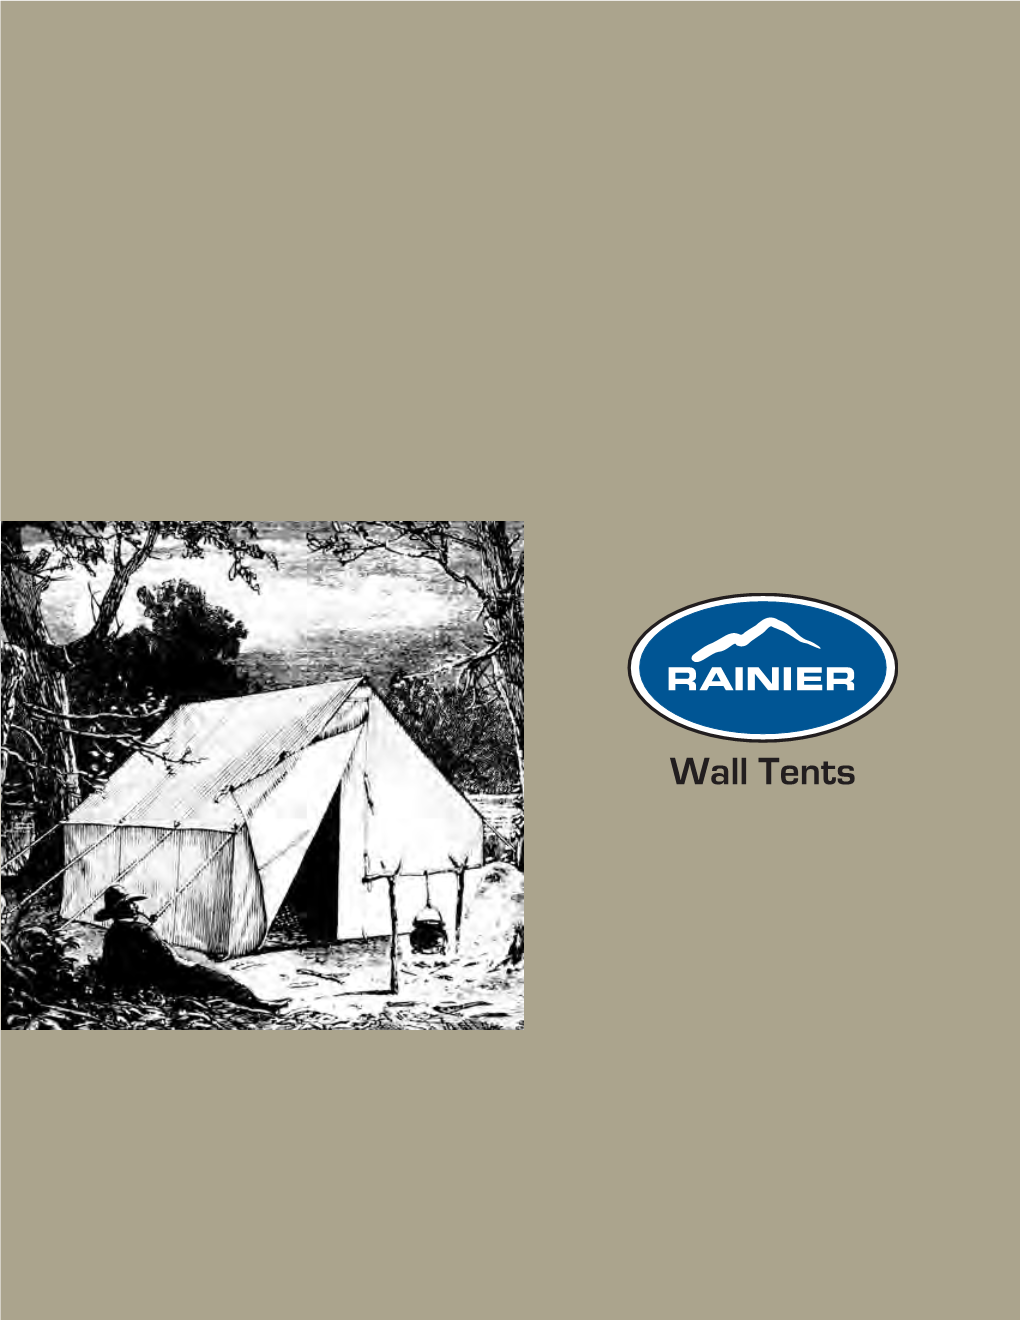 Anatomy of a Wall Tent